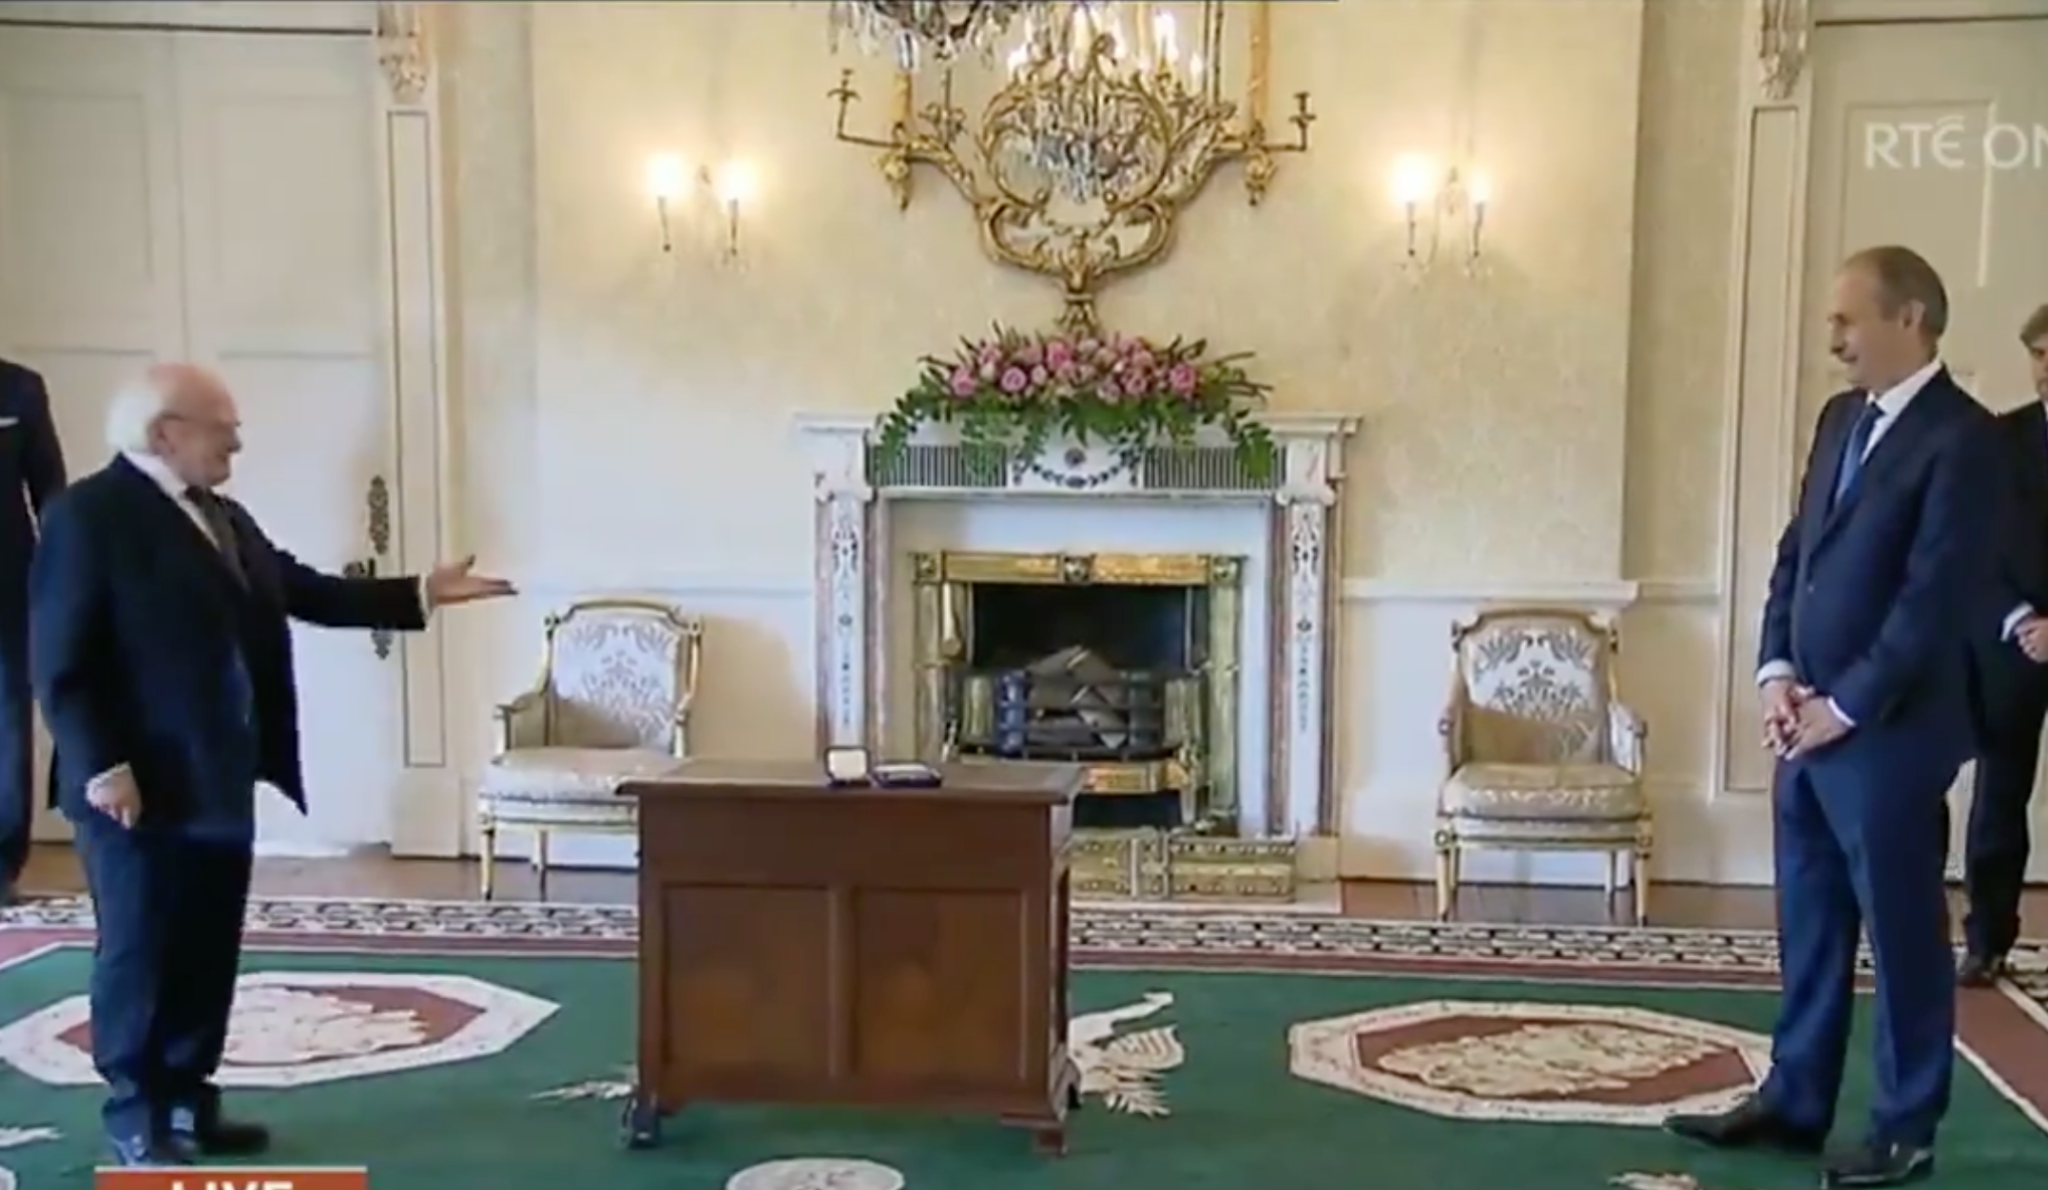 WATCH: President Higgins hands Micheal Martin with the seal of office